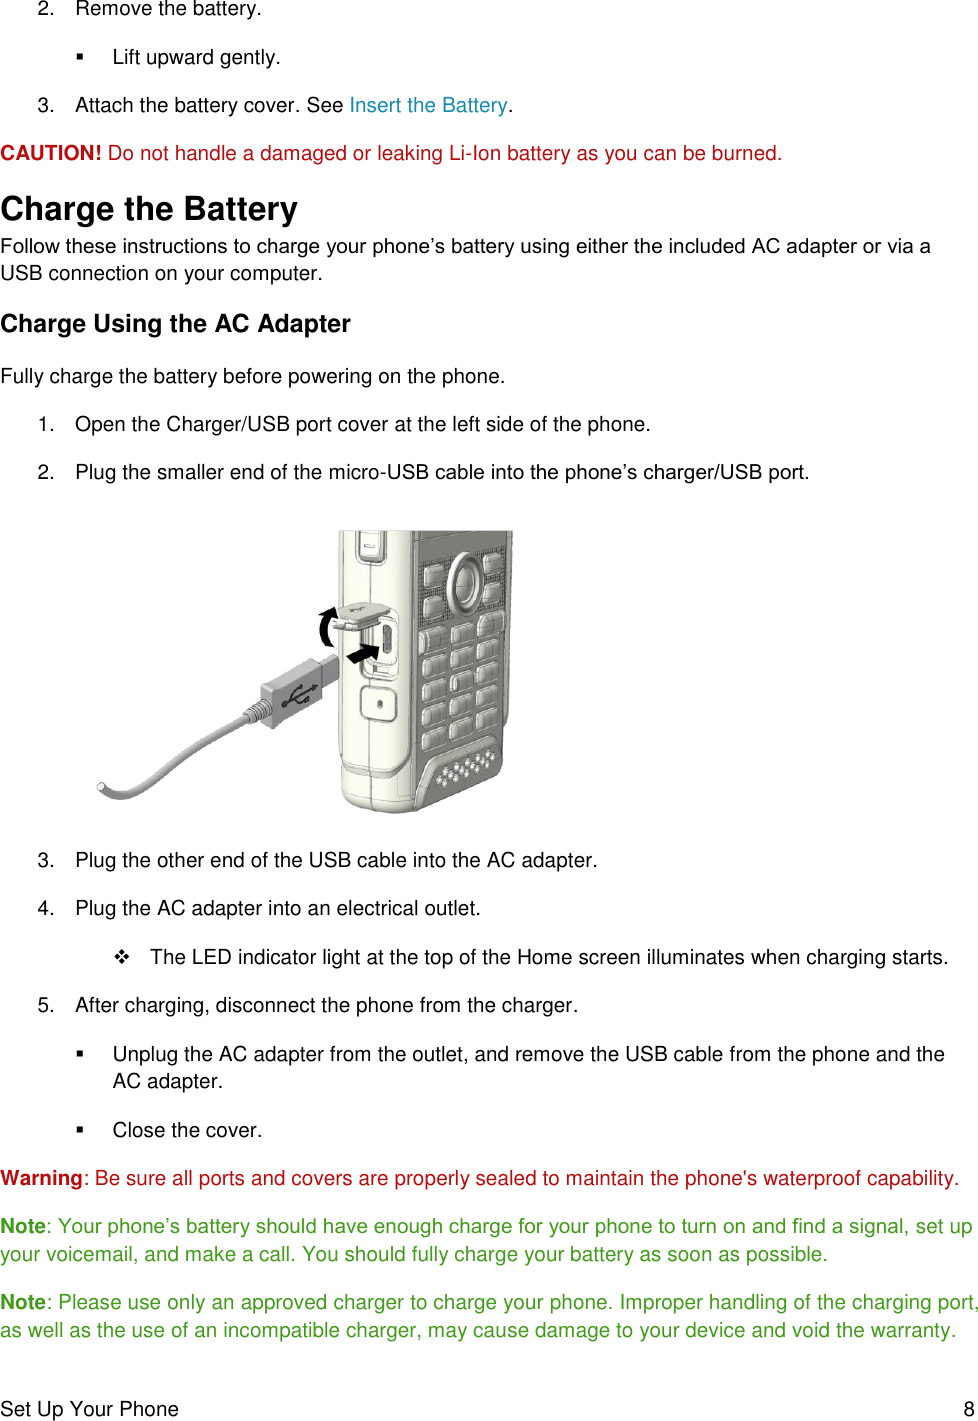 Set Up Your Phone  8 2.  Remove the battery.    Lift upward gently. 3.  Attach the battery cover. See Insert the Battery.  CAUTION! Do not handle a damaged or leaking Li-Ion battery as you can be burned. Charge the Battery Follow these instructions to charge your phone’s battery using either the included AC adapter or via a USB connection on your computer. Charge Using the AC Adapter Fully charge the battery before powering on the phone. 1.  Open the Charger/USB port cover at the left side of the phone. 2.  Plug the smaller end of the micro-USB cable into the phone’s charger/USB port.   3.  Plug the other end of the USB cable into the AC adapter.  4.  Plug the AC adapter into an electrical outlet.    The LED indicator light at the top of the Home screen illuminates when charging starts.  5.  After charging, disconnect the phone from the charger.   Unplug the AC adapter from the outlet, and remove the USB cable from the phone and the AC adapter.   Close the cover.  Warning: Be sure all ports and covers are properly sealed to maintain the phone&apos;s waterproof capability. Note: Your phone’s battery should have enough charge for your phone to turn on and find a signal, set up your voicemail, and make a call. You should fully charge your battery as soon as possible. Note: Please use only an approved charger to charge your phone. Improper handling of the charging port, as well as the use of an incompatible charger, may cause damage to your device and void the warranty. 